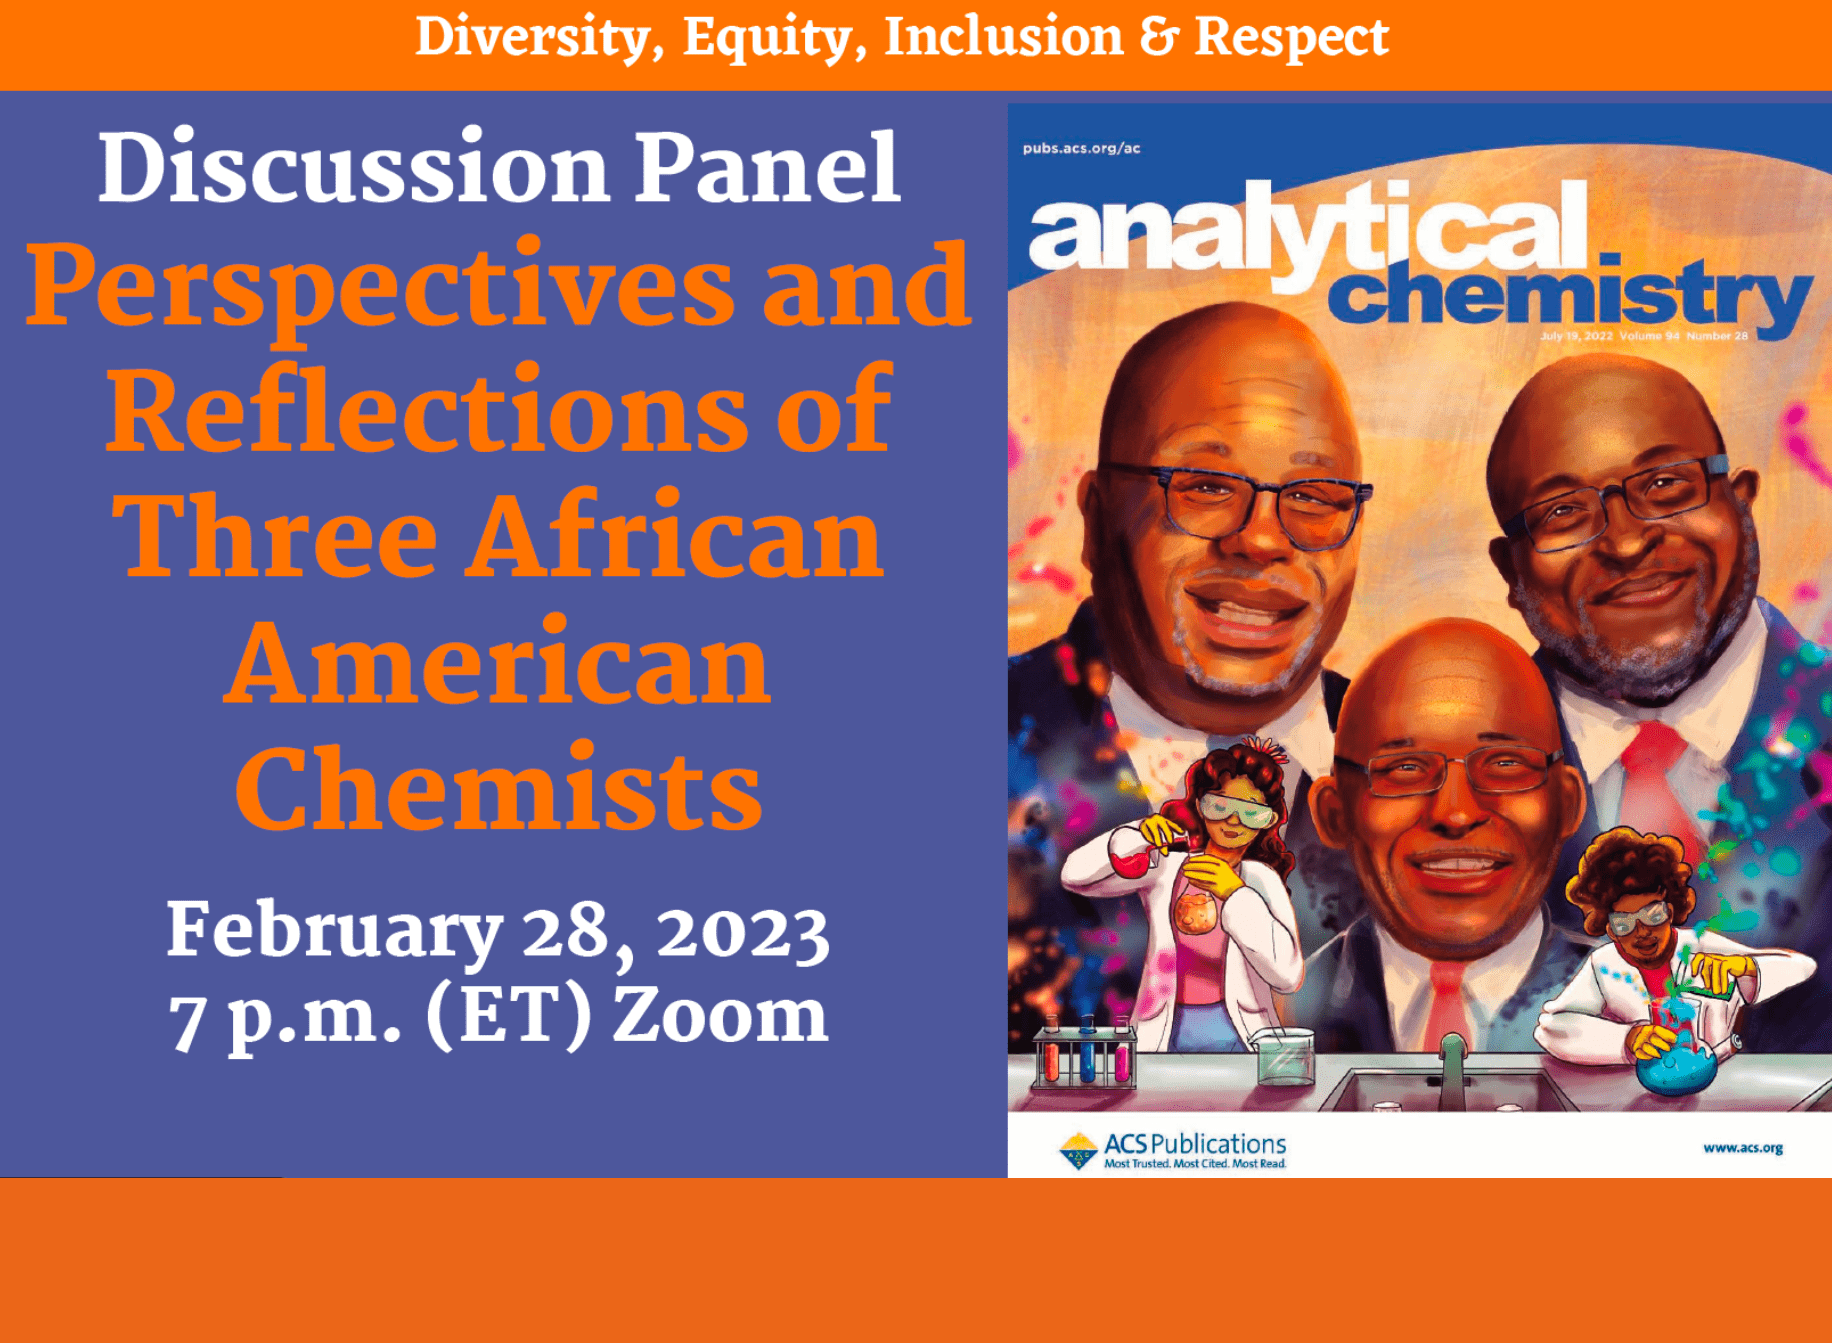 The ACS Division of Analytical Chemistry presents:  Virtual Discussion Panel: Perspectives and Reflections of Three African American Chemists